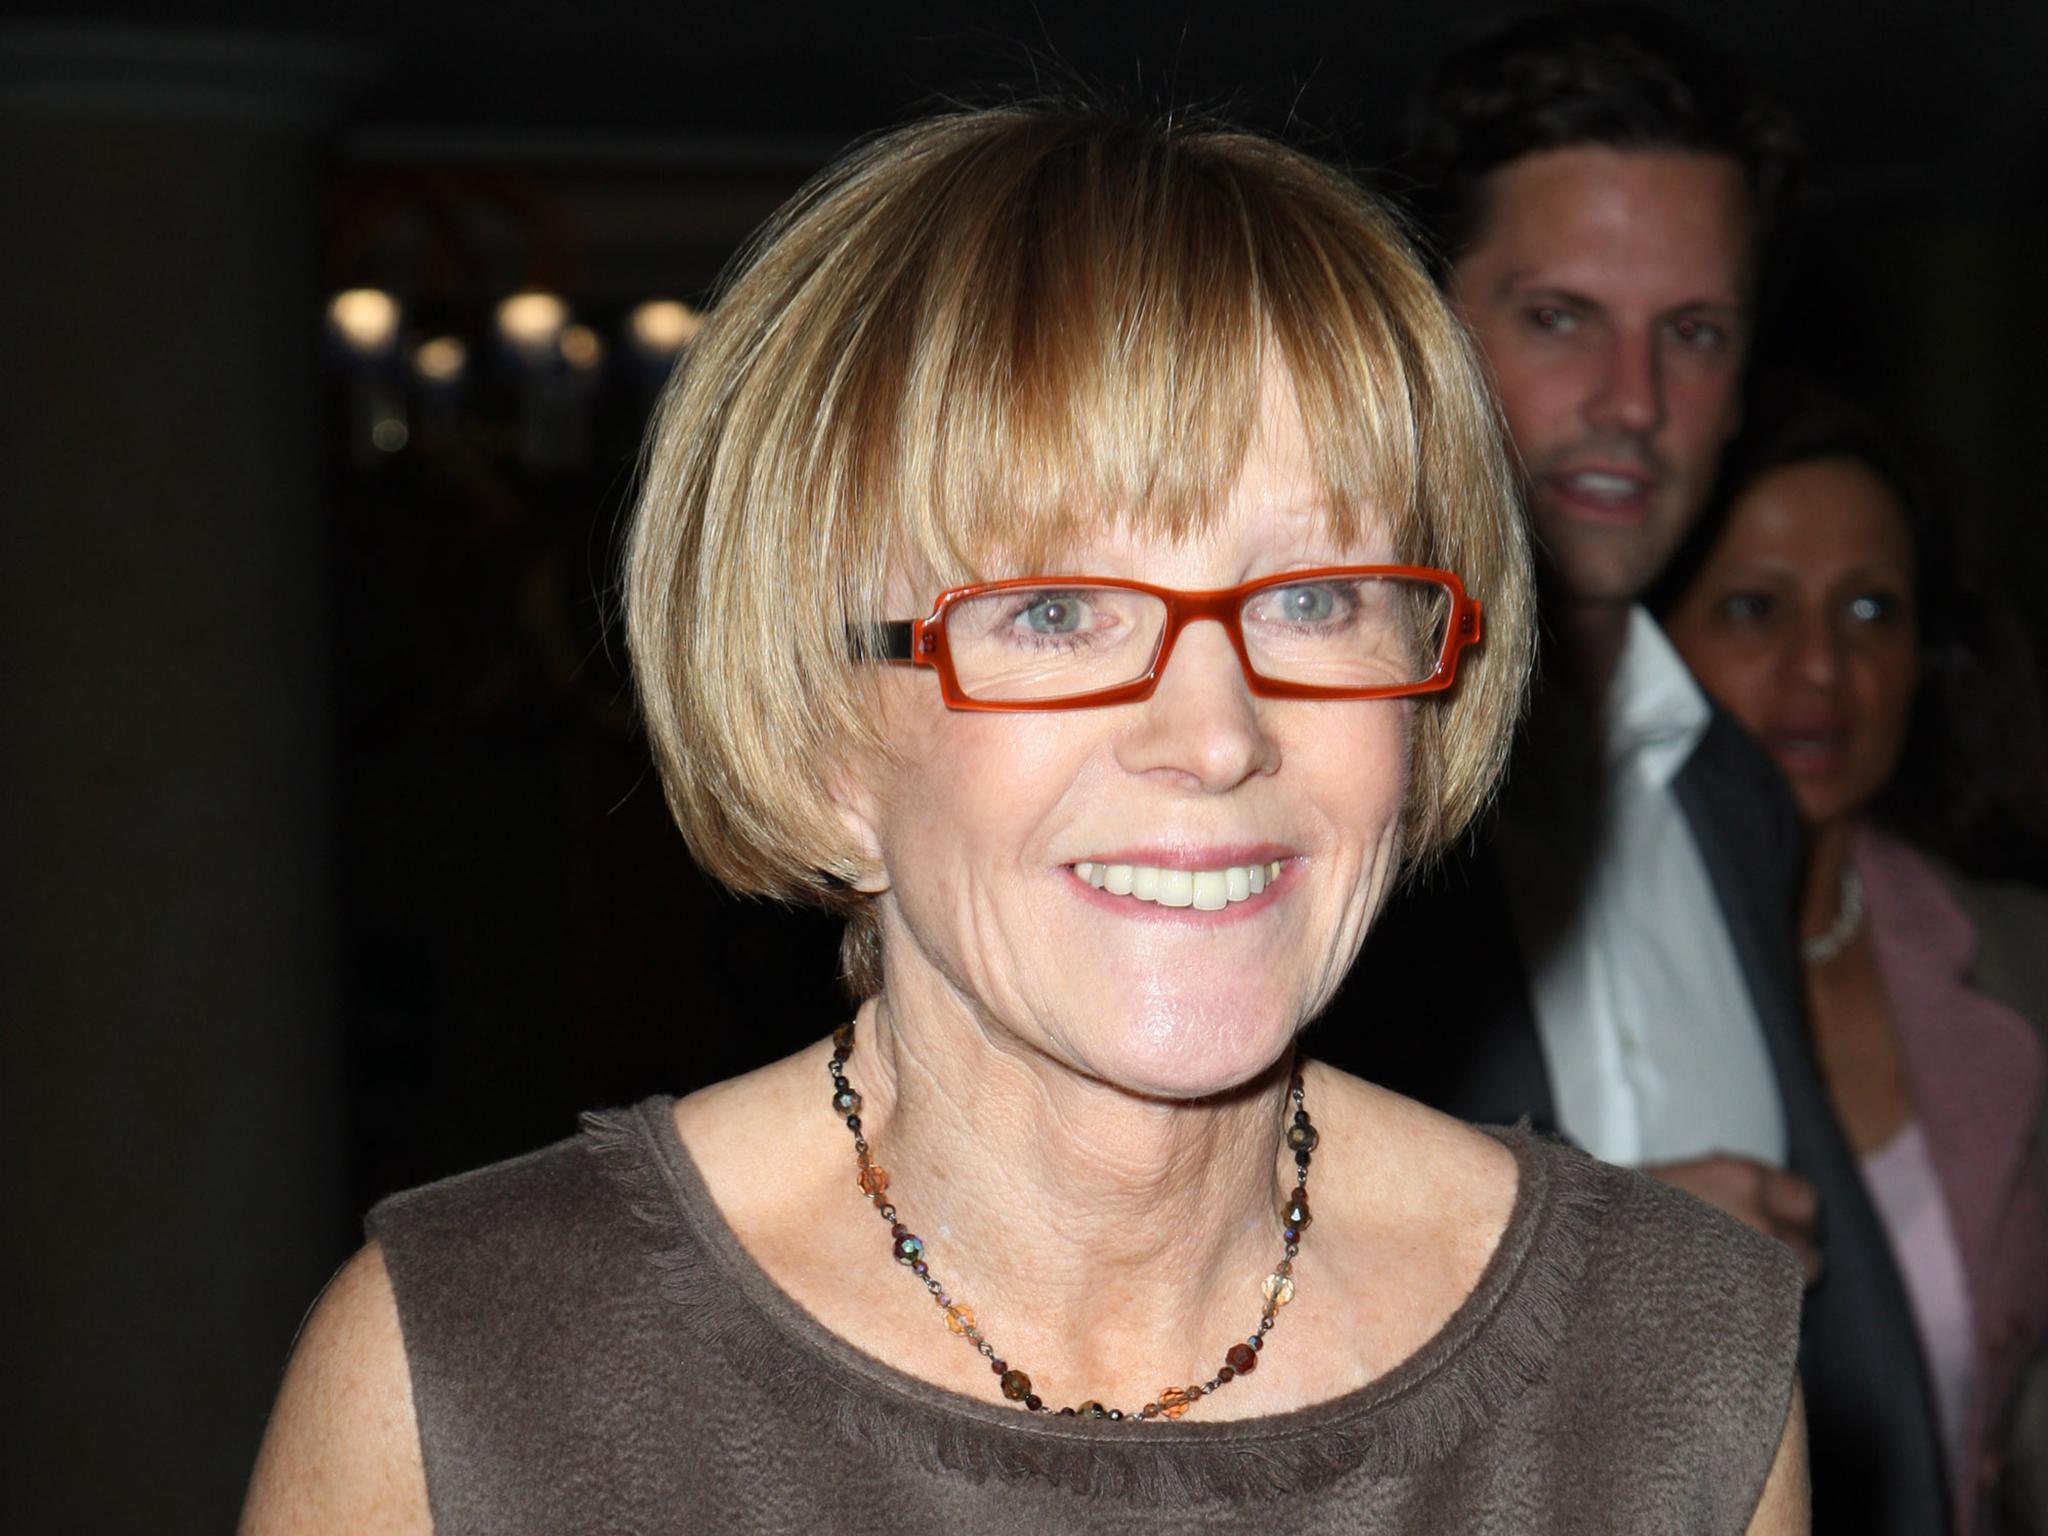 Anne Robinson complained of the 'fragility' of young women after large numbers of people spoke out about sexual harassment in the workplace